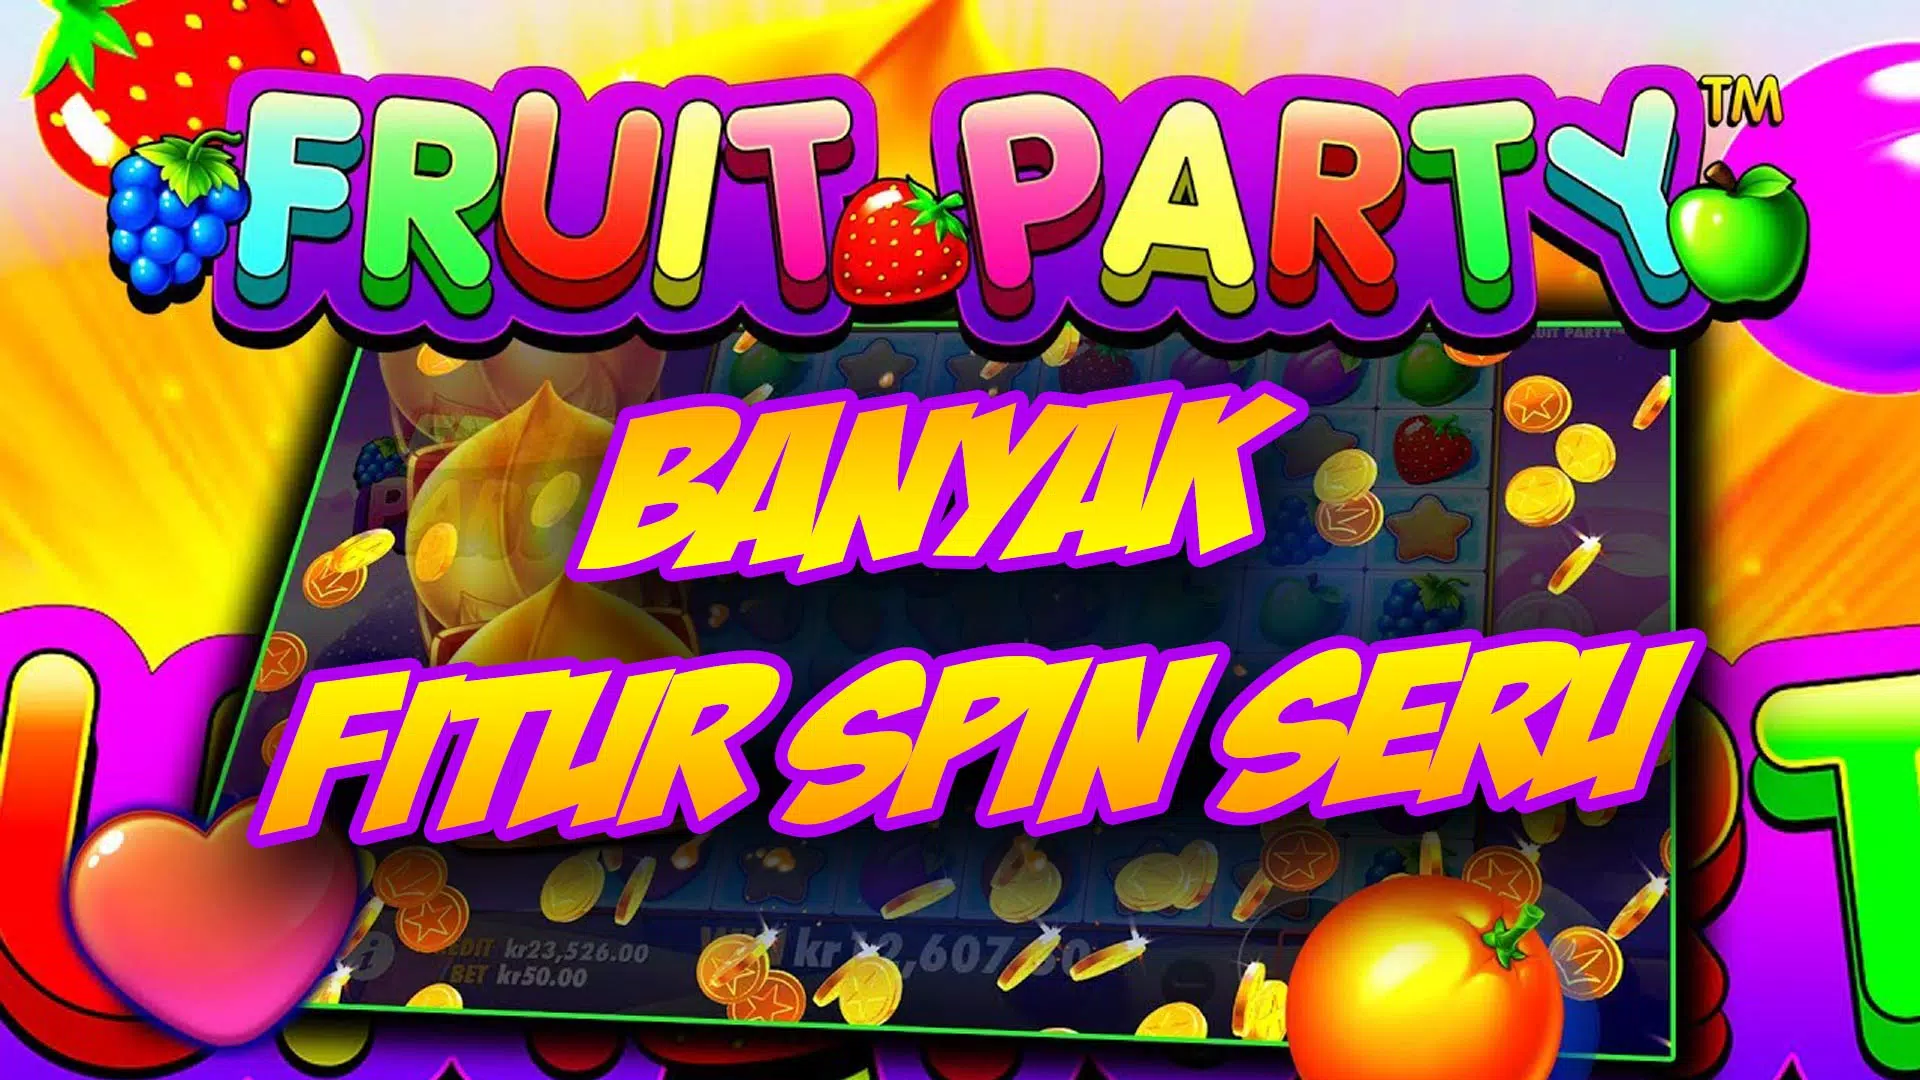 FRUITY PARTY - Play Online for Free!